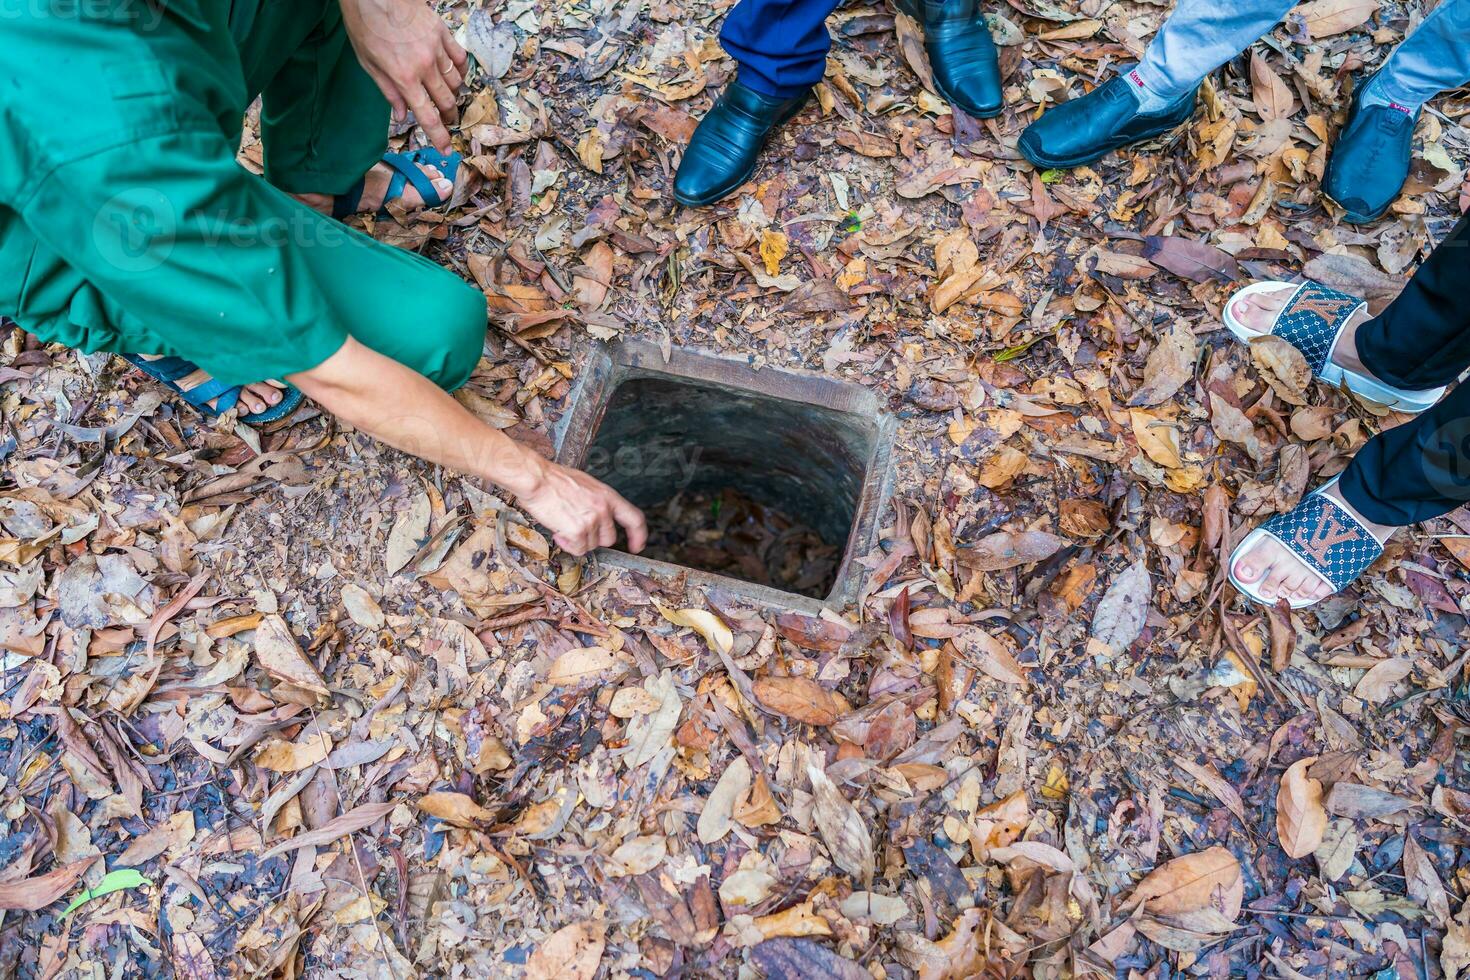 The Cu Chi tunnels. A guide demonstrating how a Vietcong hide into the Tunnel. It's used in Vietnam war. Famous tourist attraction in Vietnam. Stock photo